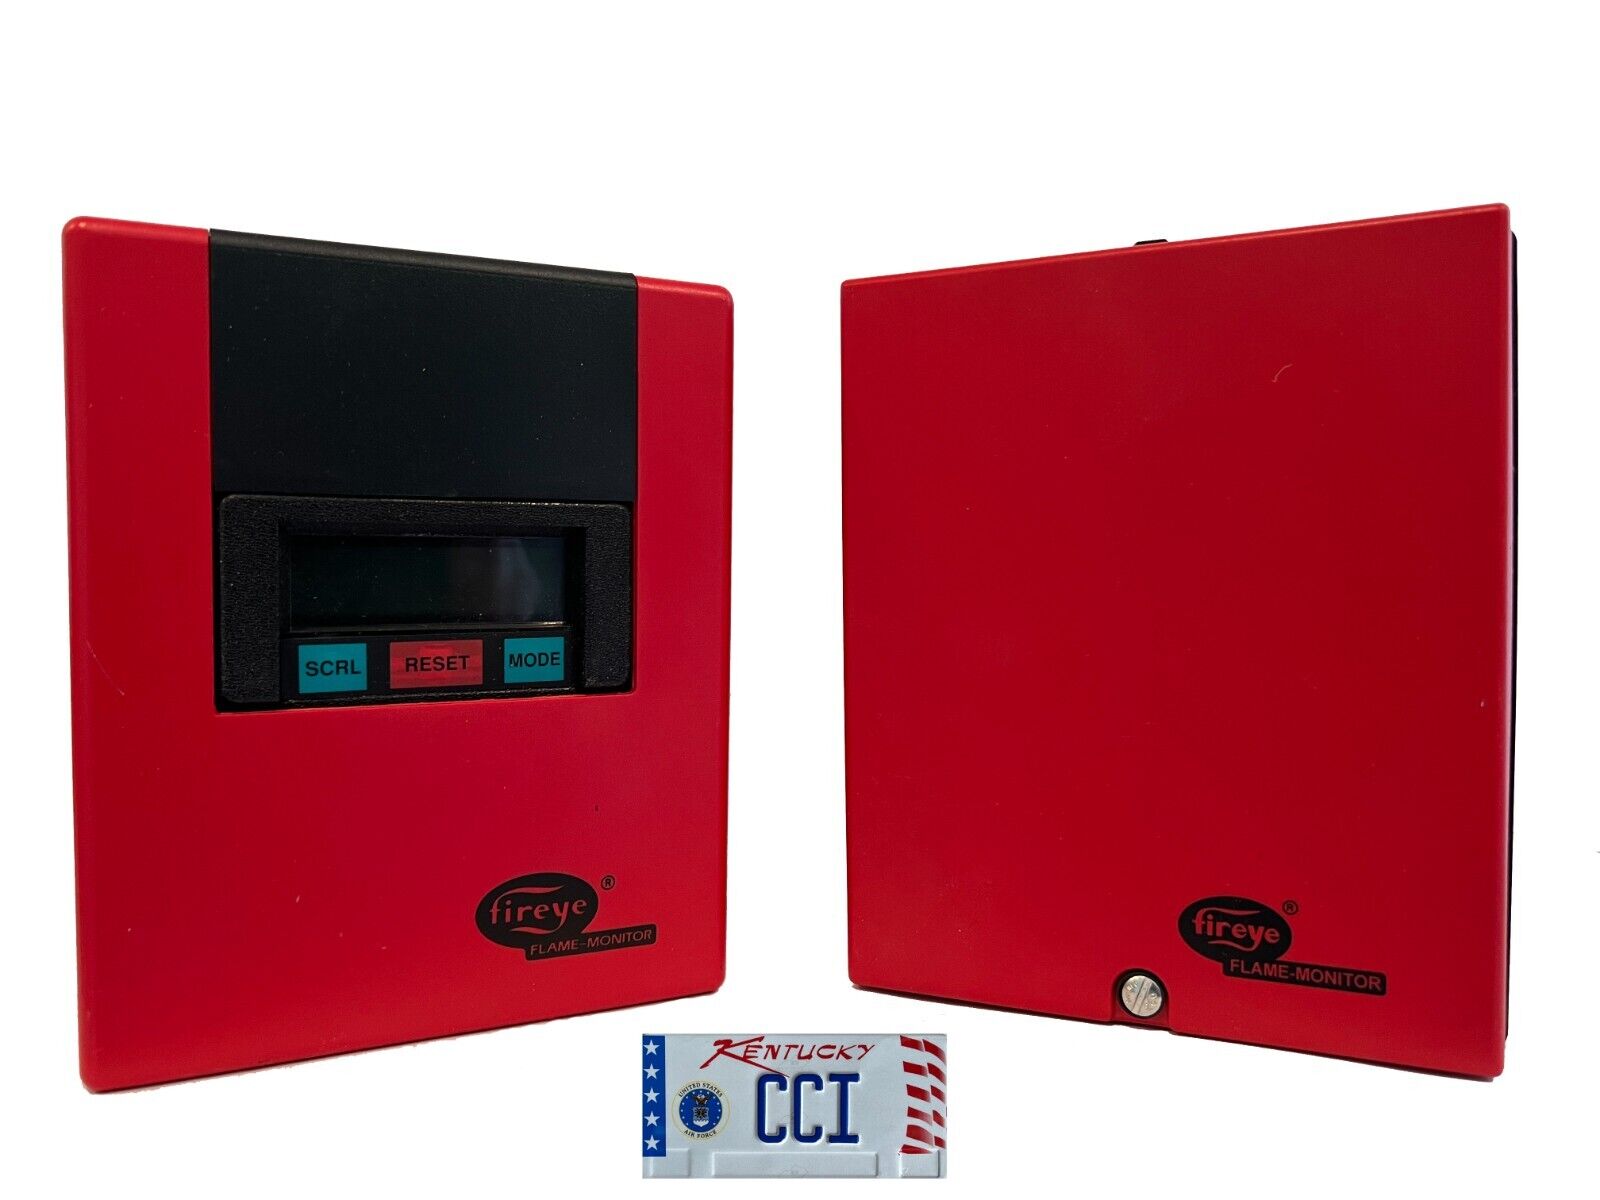 Fireye E110 Complete Safeguard System With E300 Annunciator & Accessories